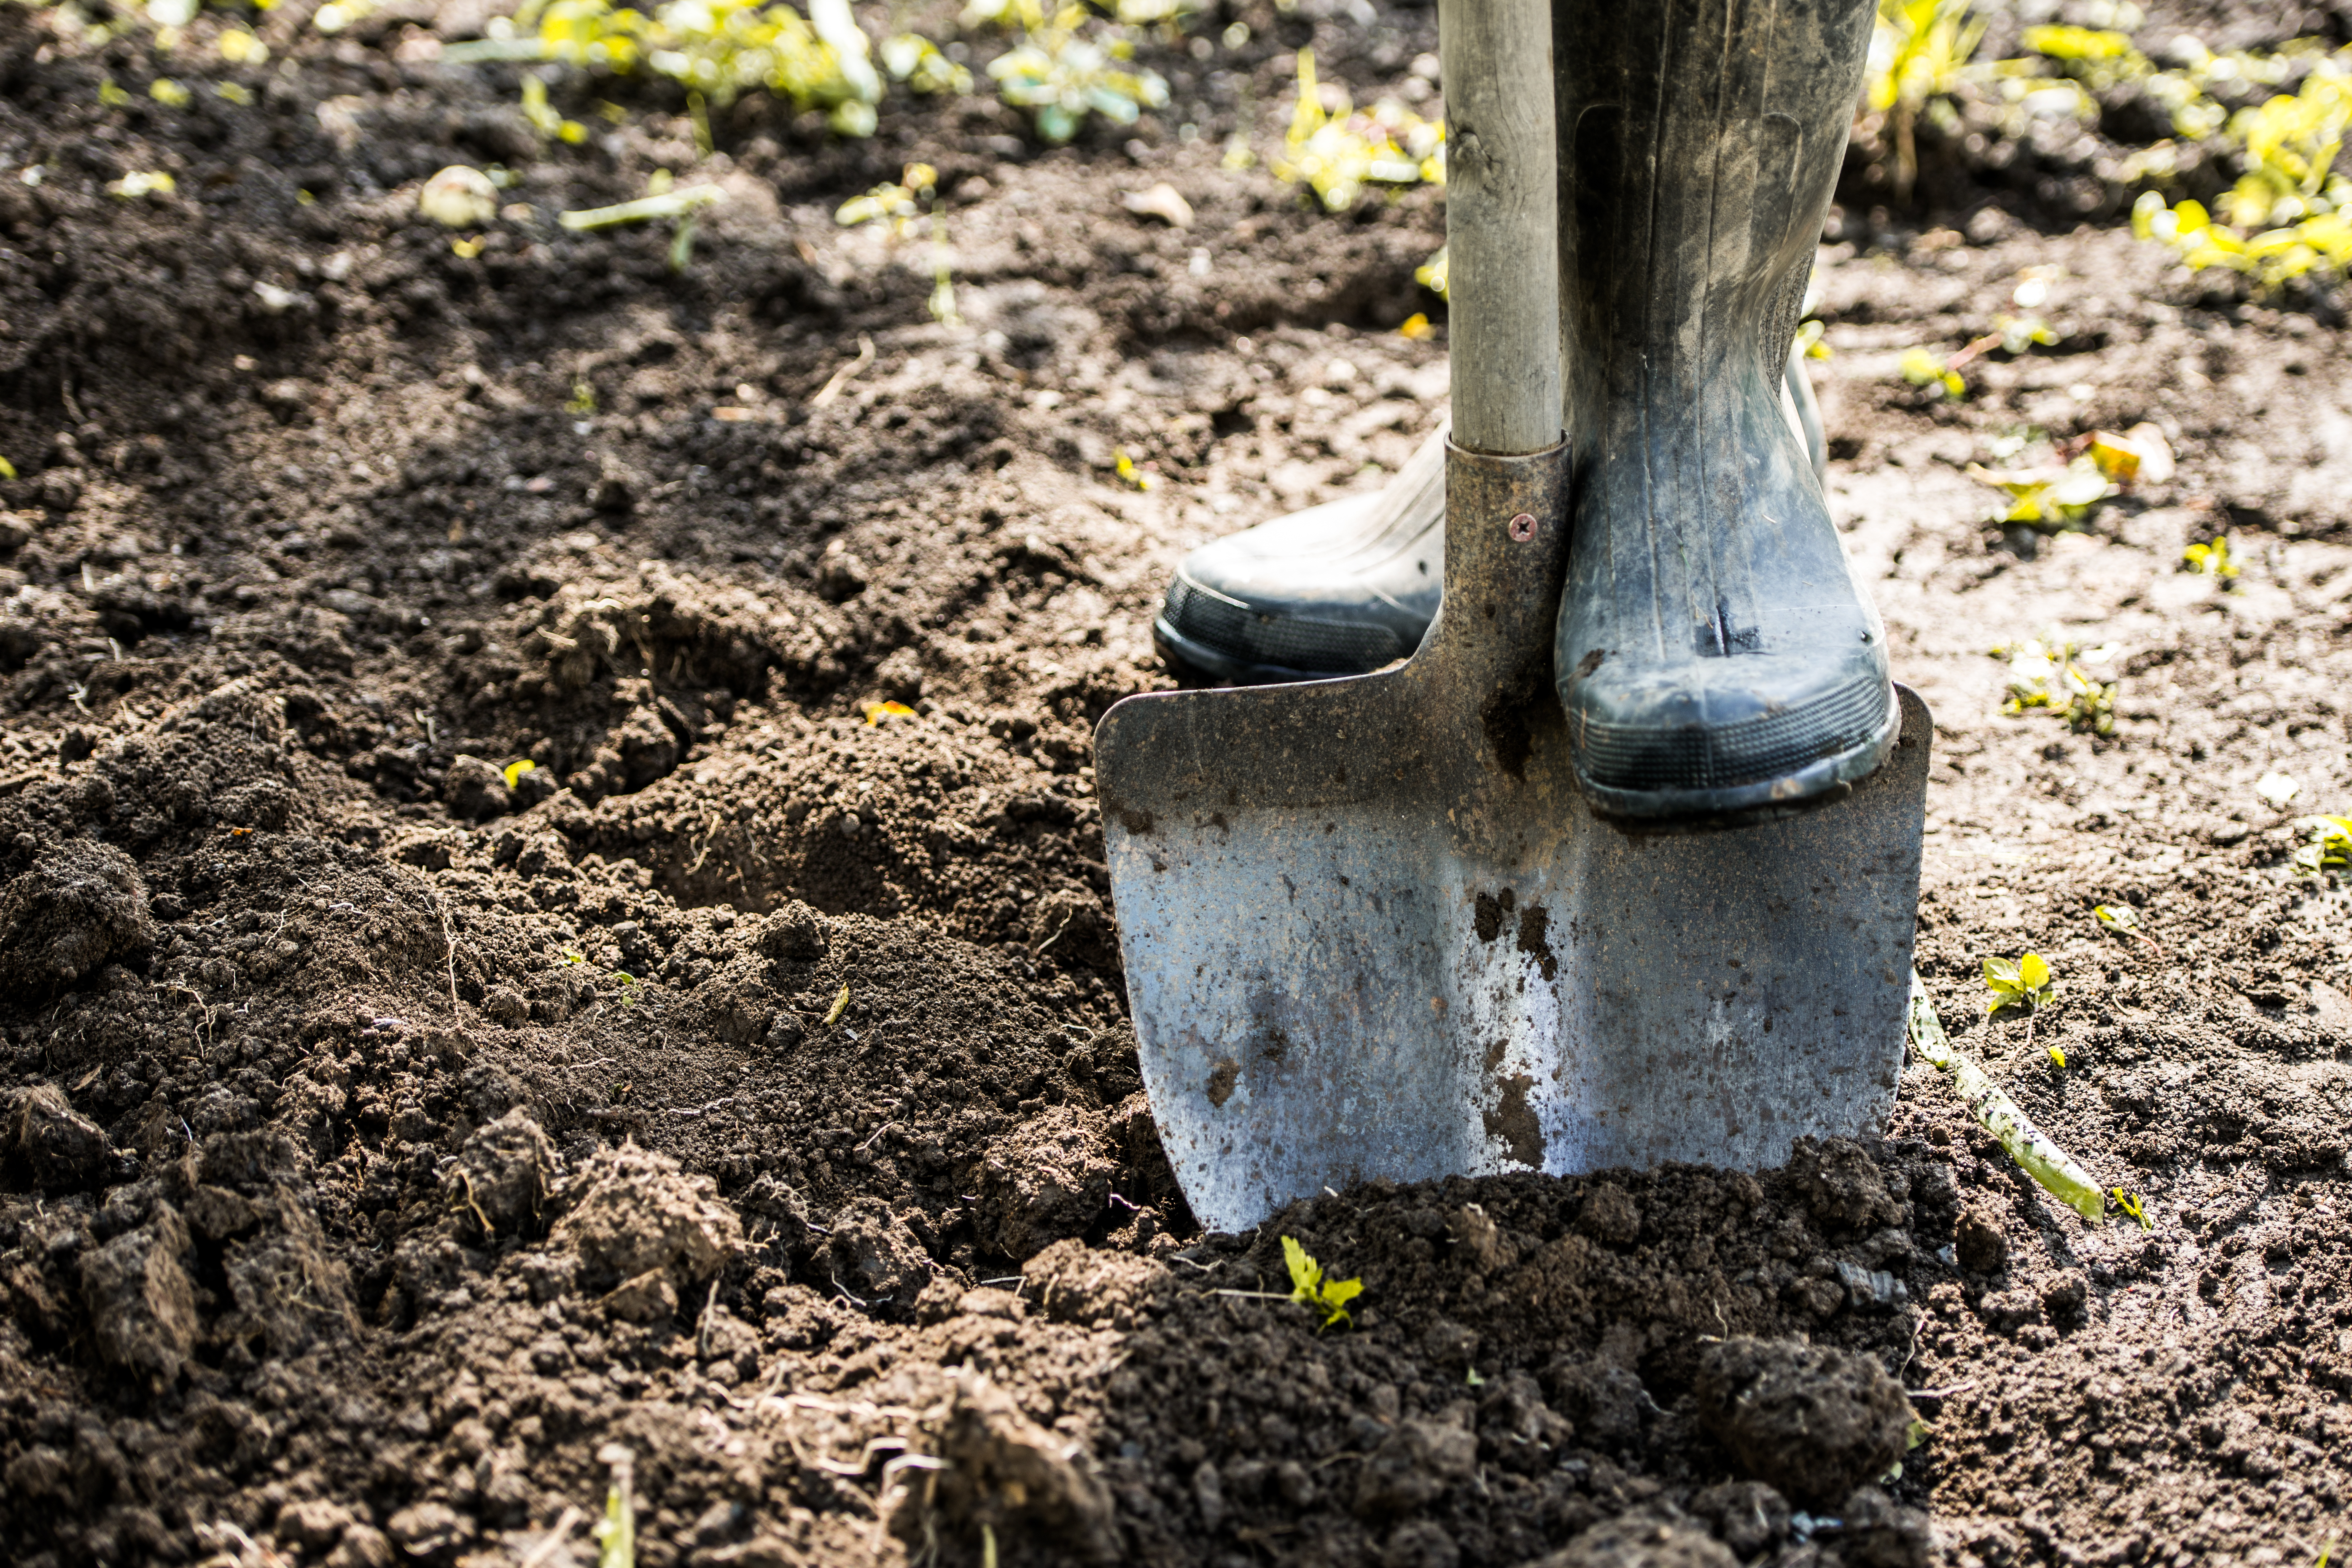 A person in rubber boots with their foot on a garden spade digging into the ground